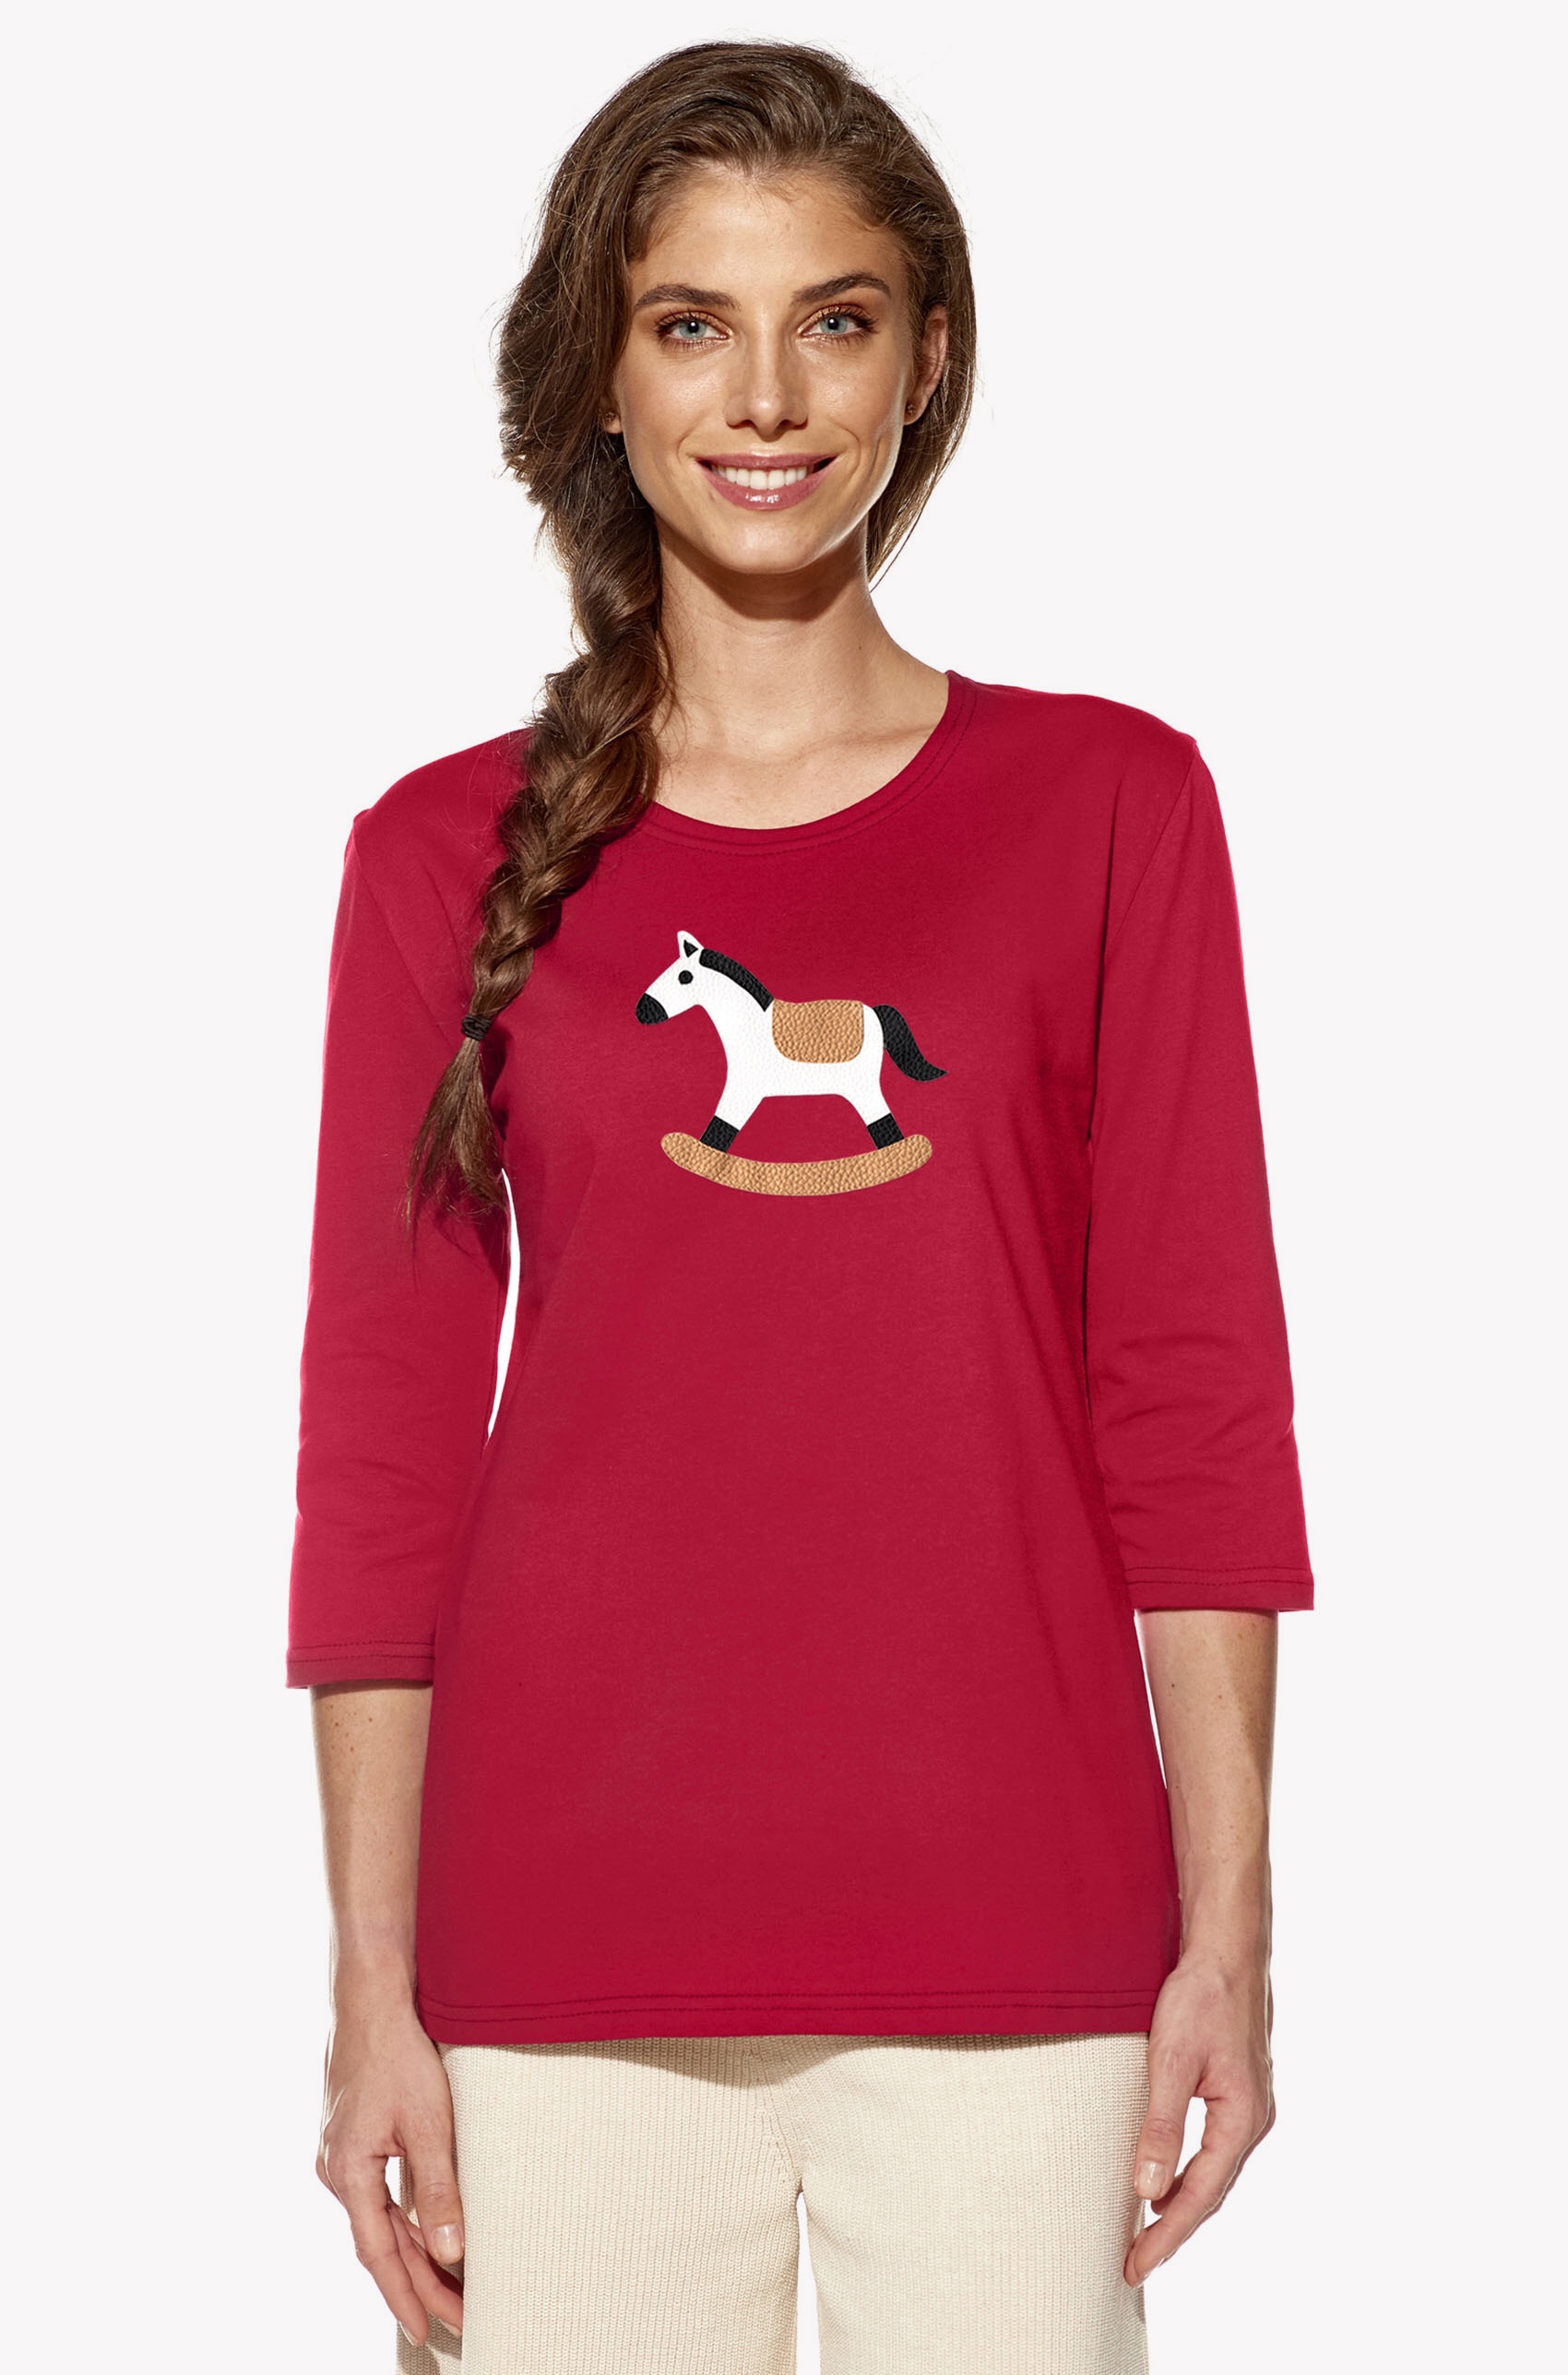 Shirt with rocking horse